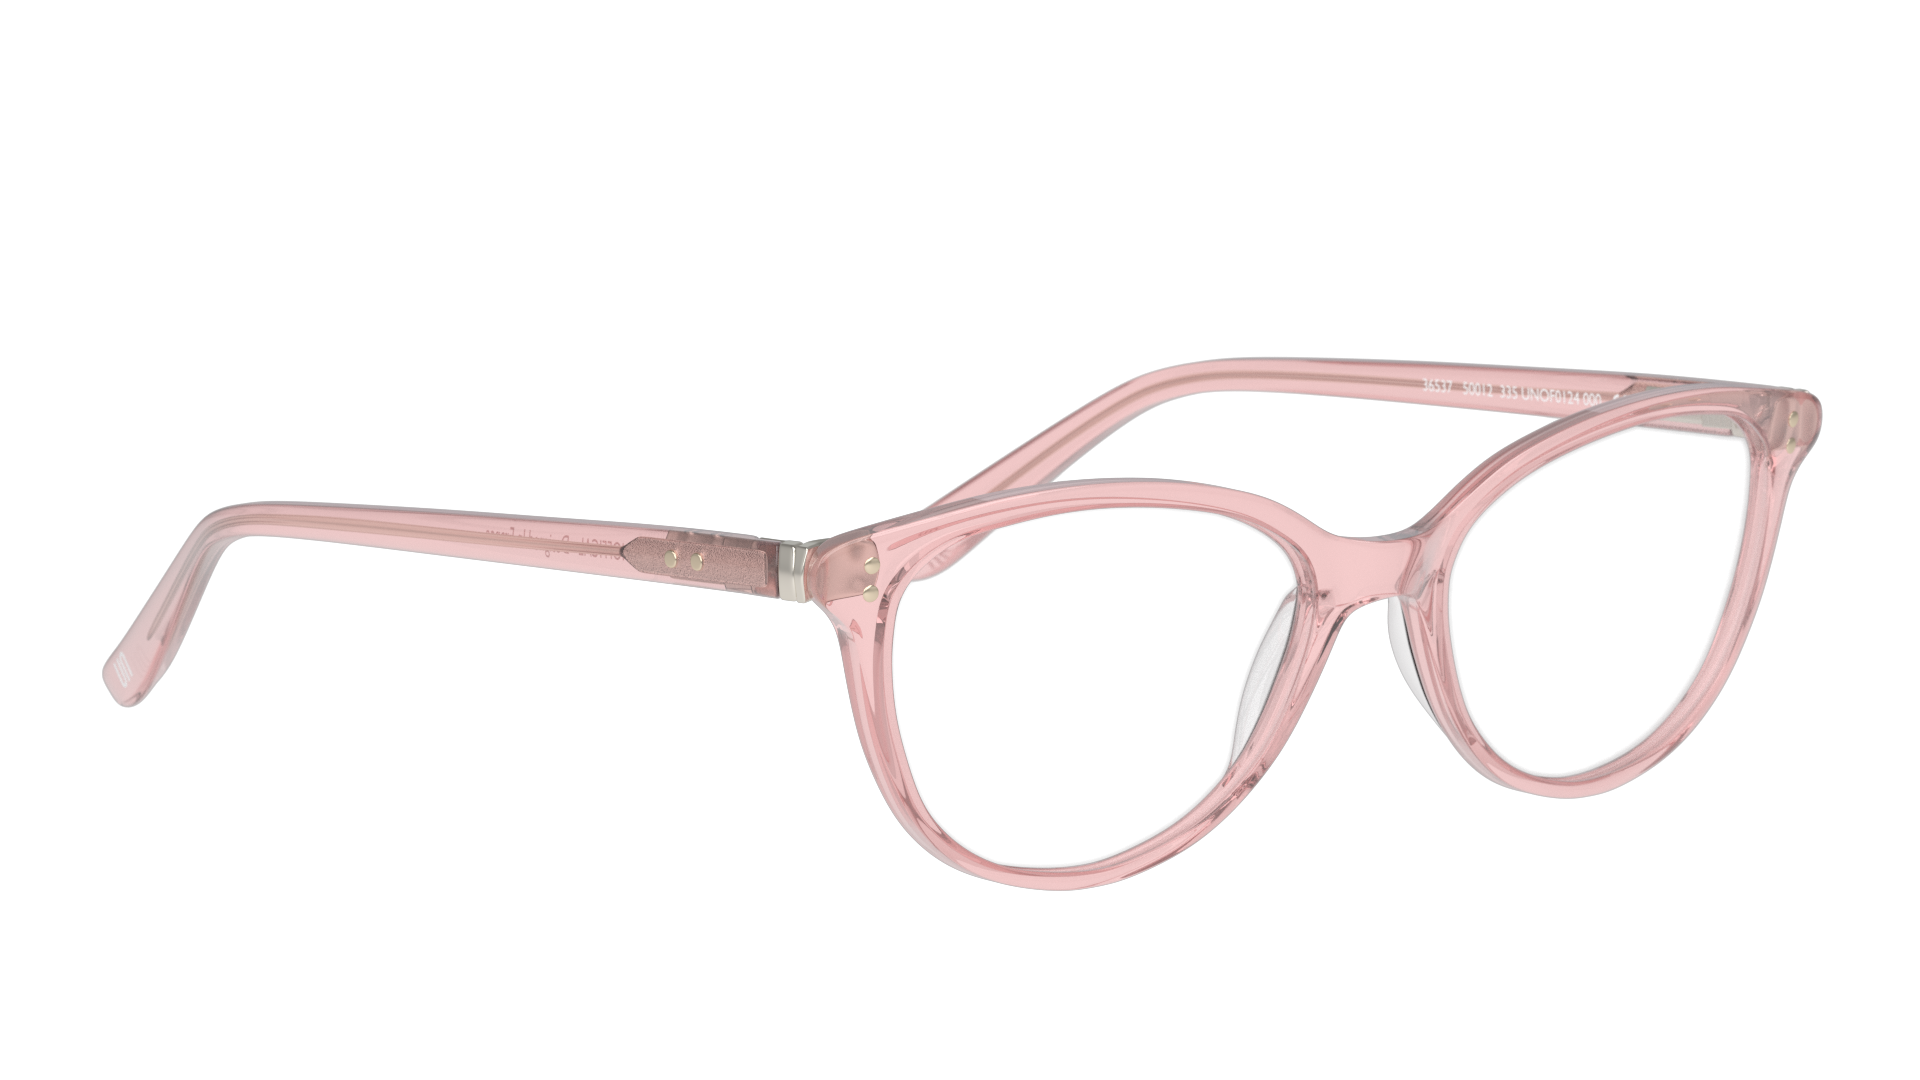 Angle_Right01 Unofficial UNOF0123 (PP00) Glasses Transparent / Pink